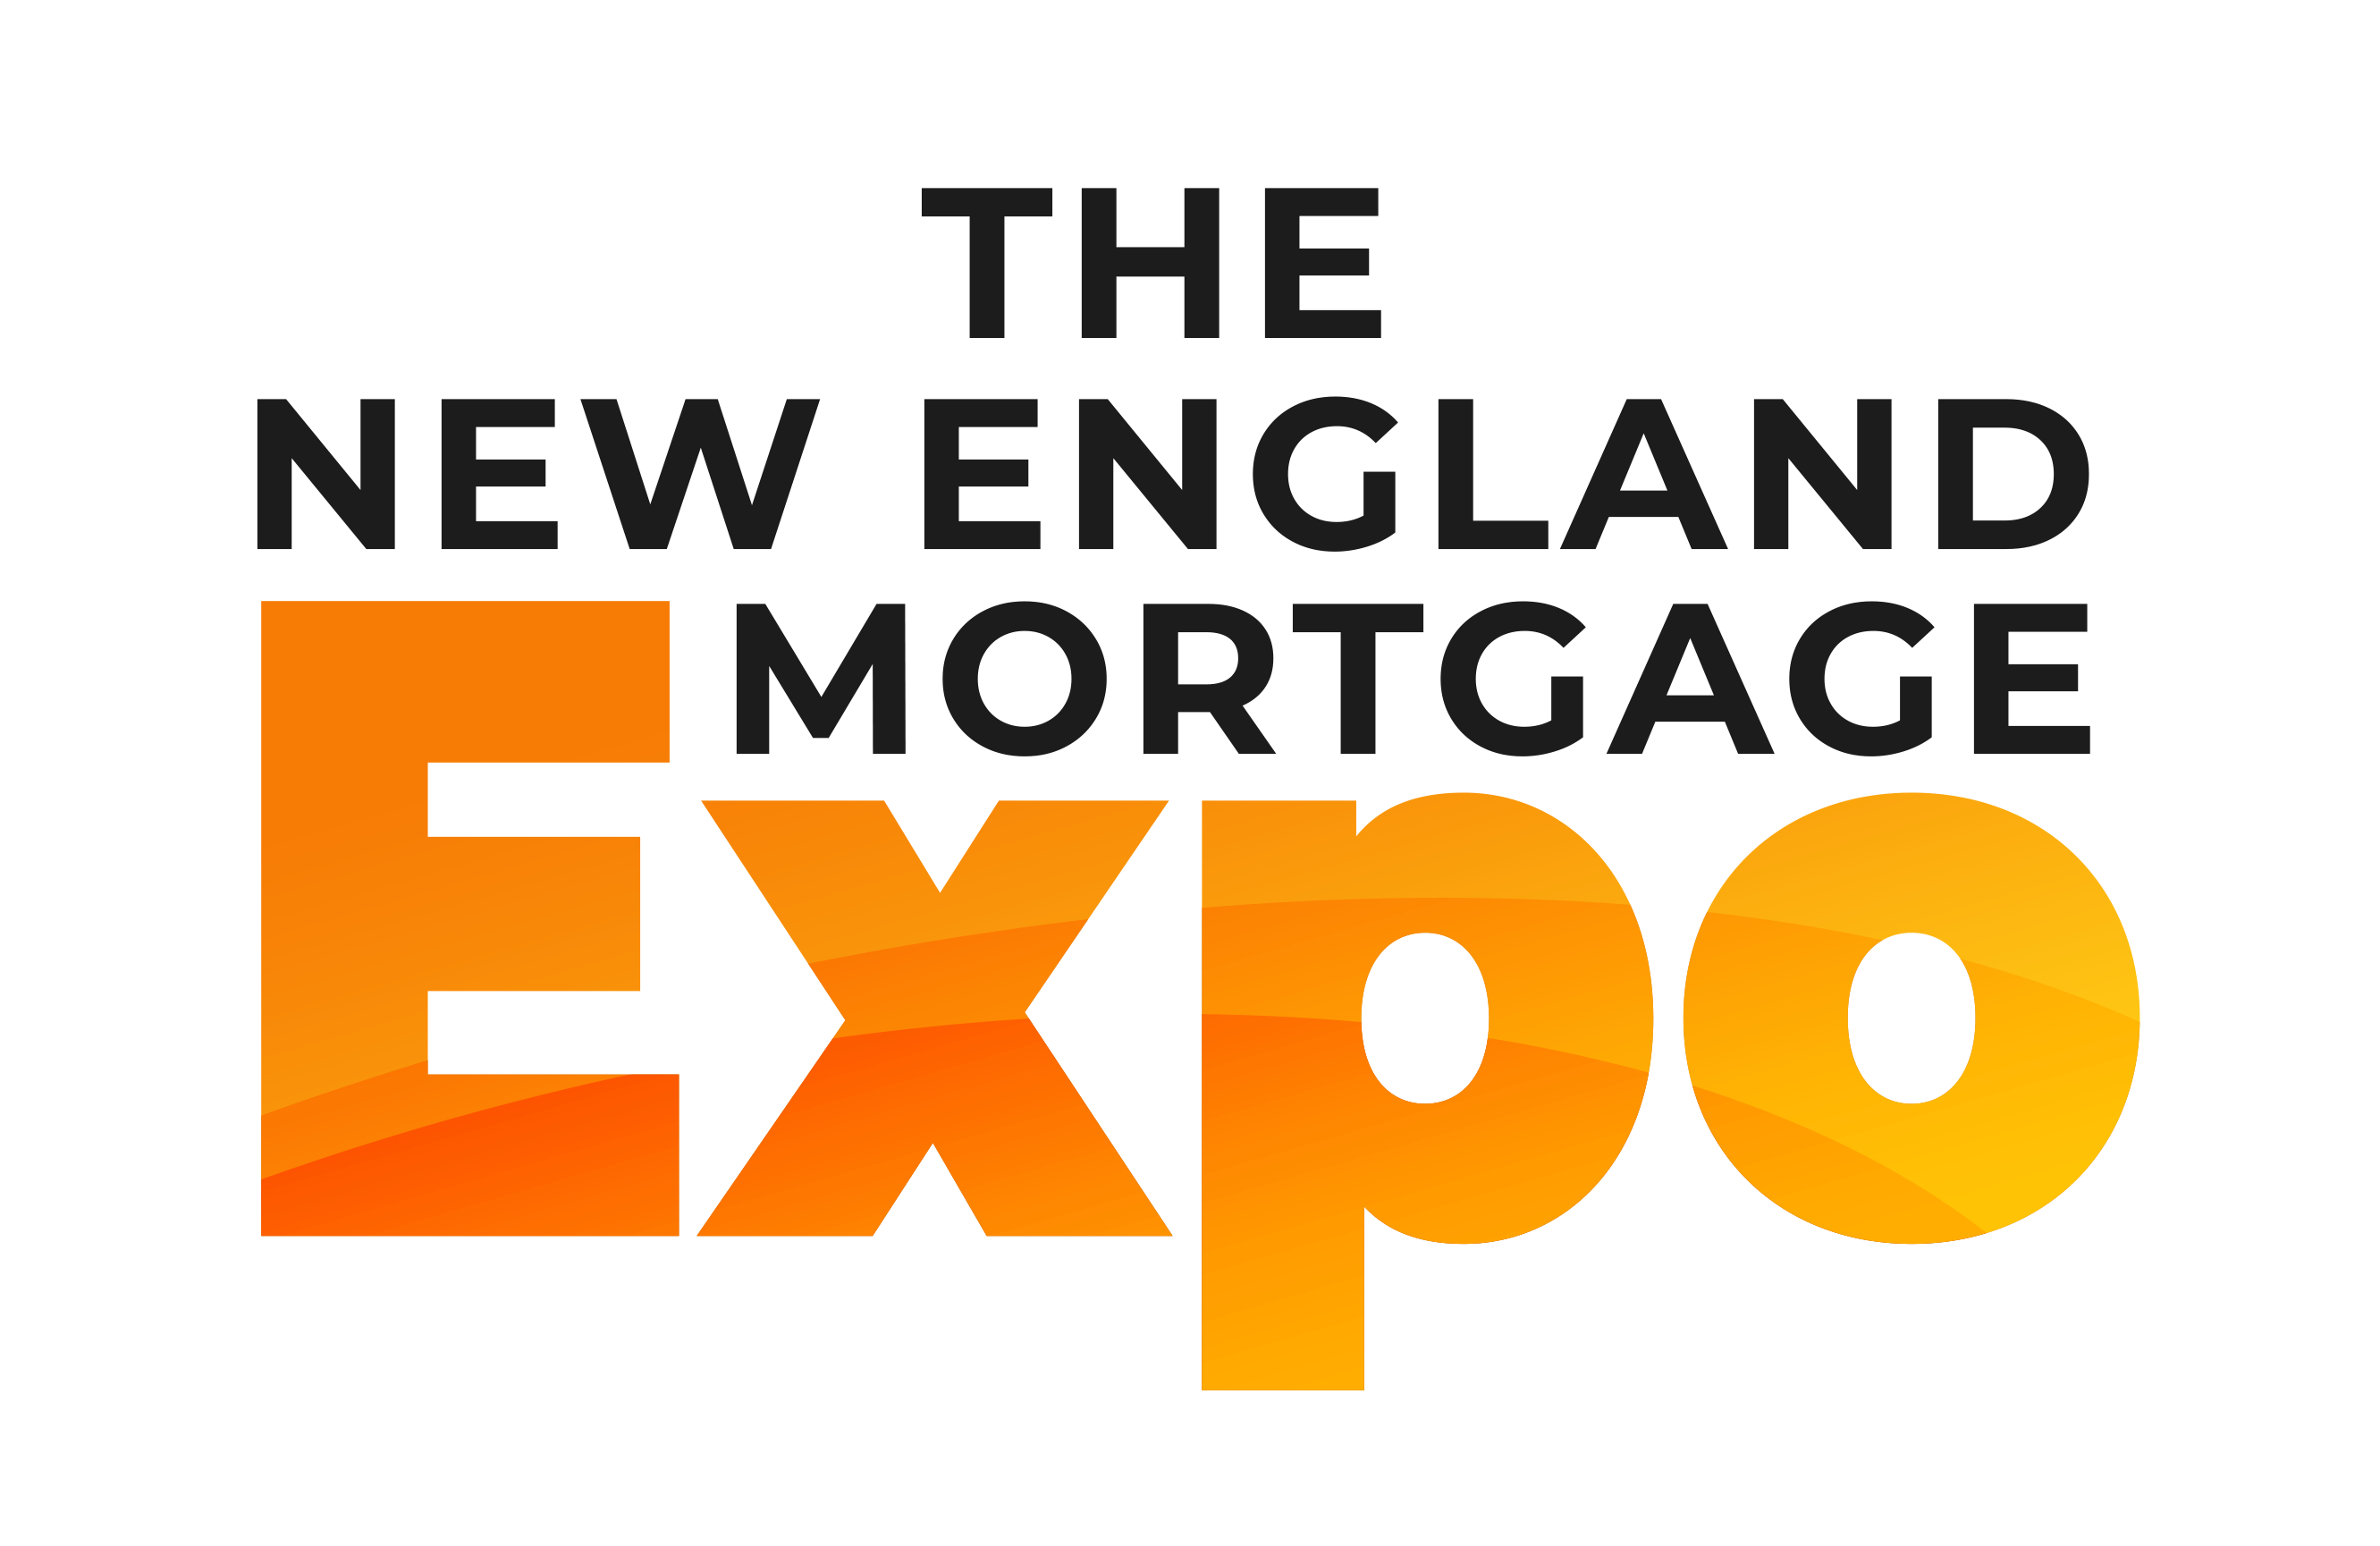 The New England Mortgage Expo